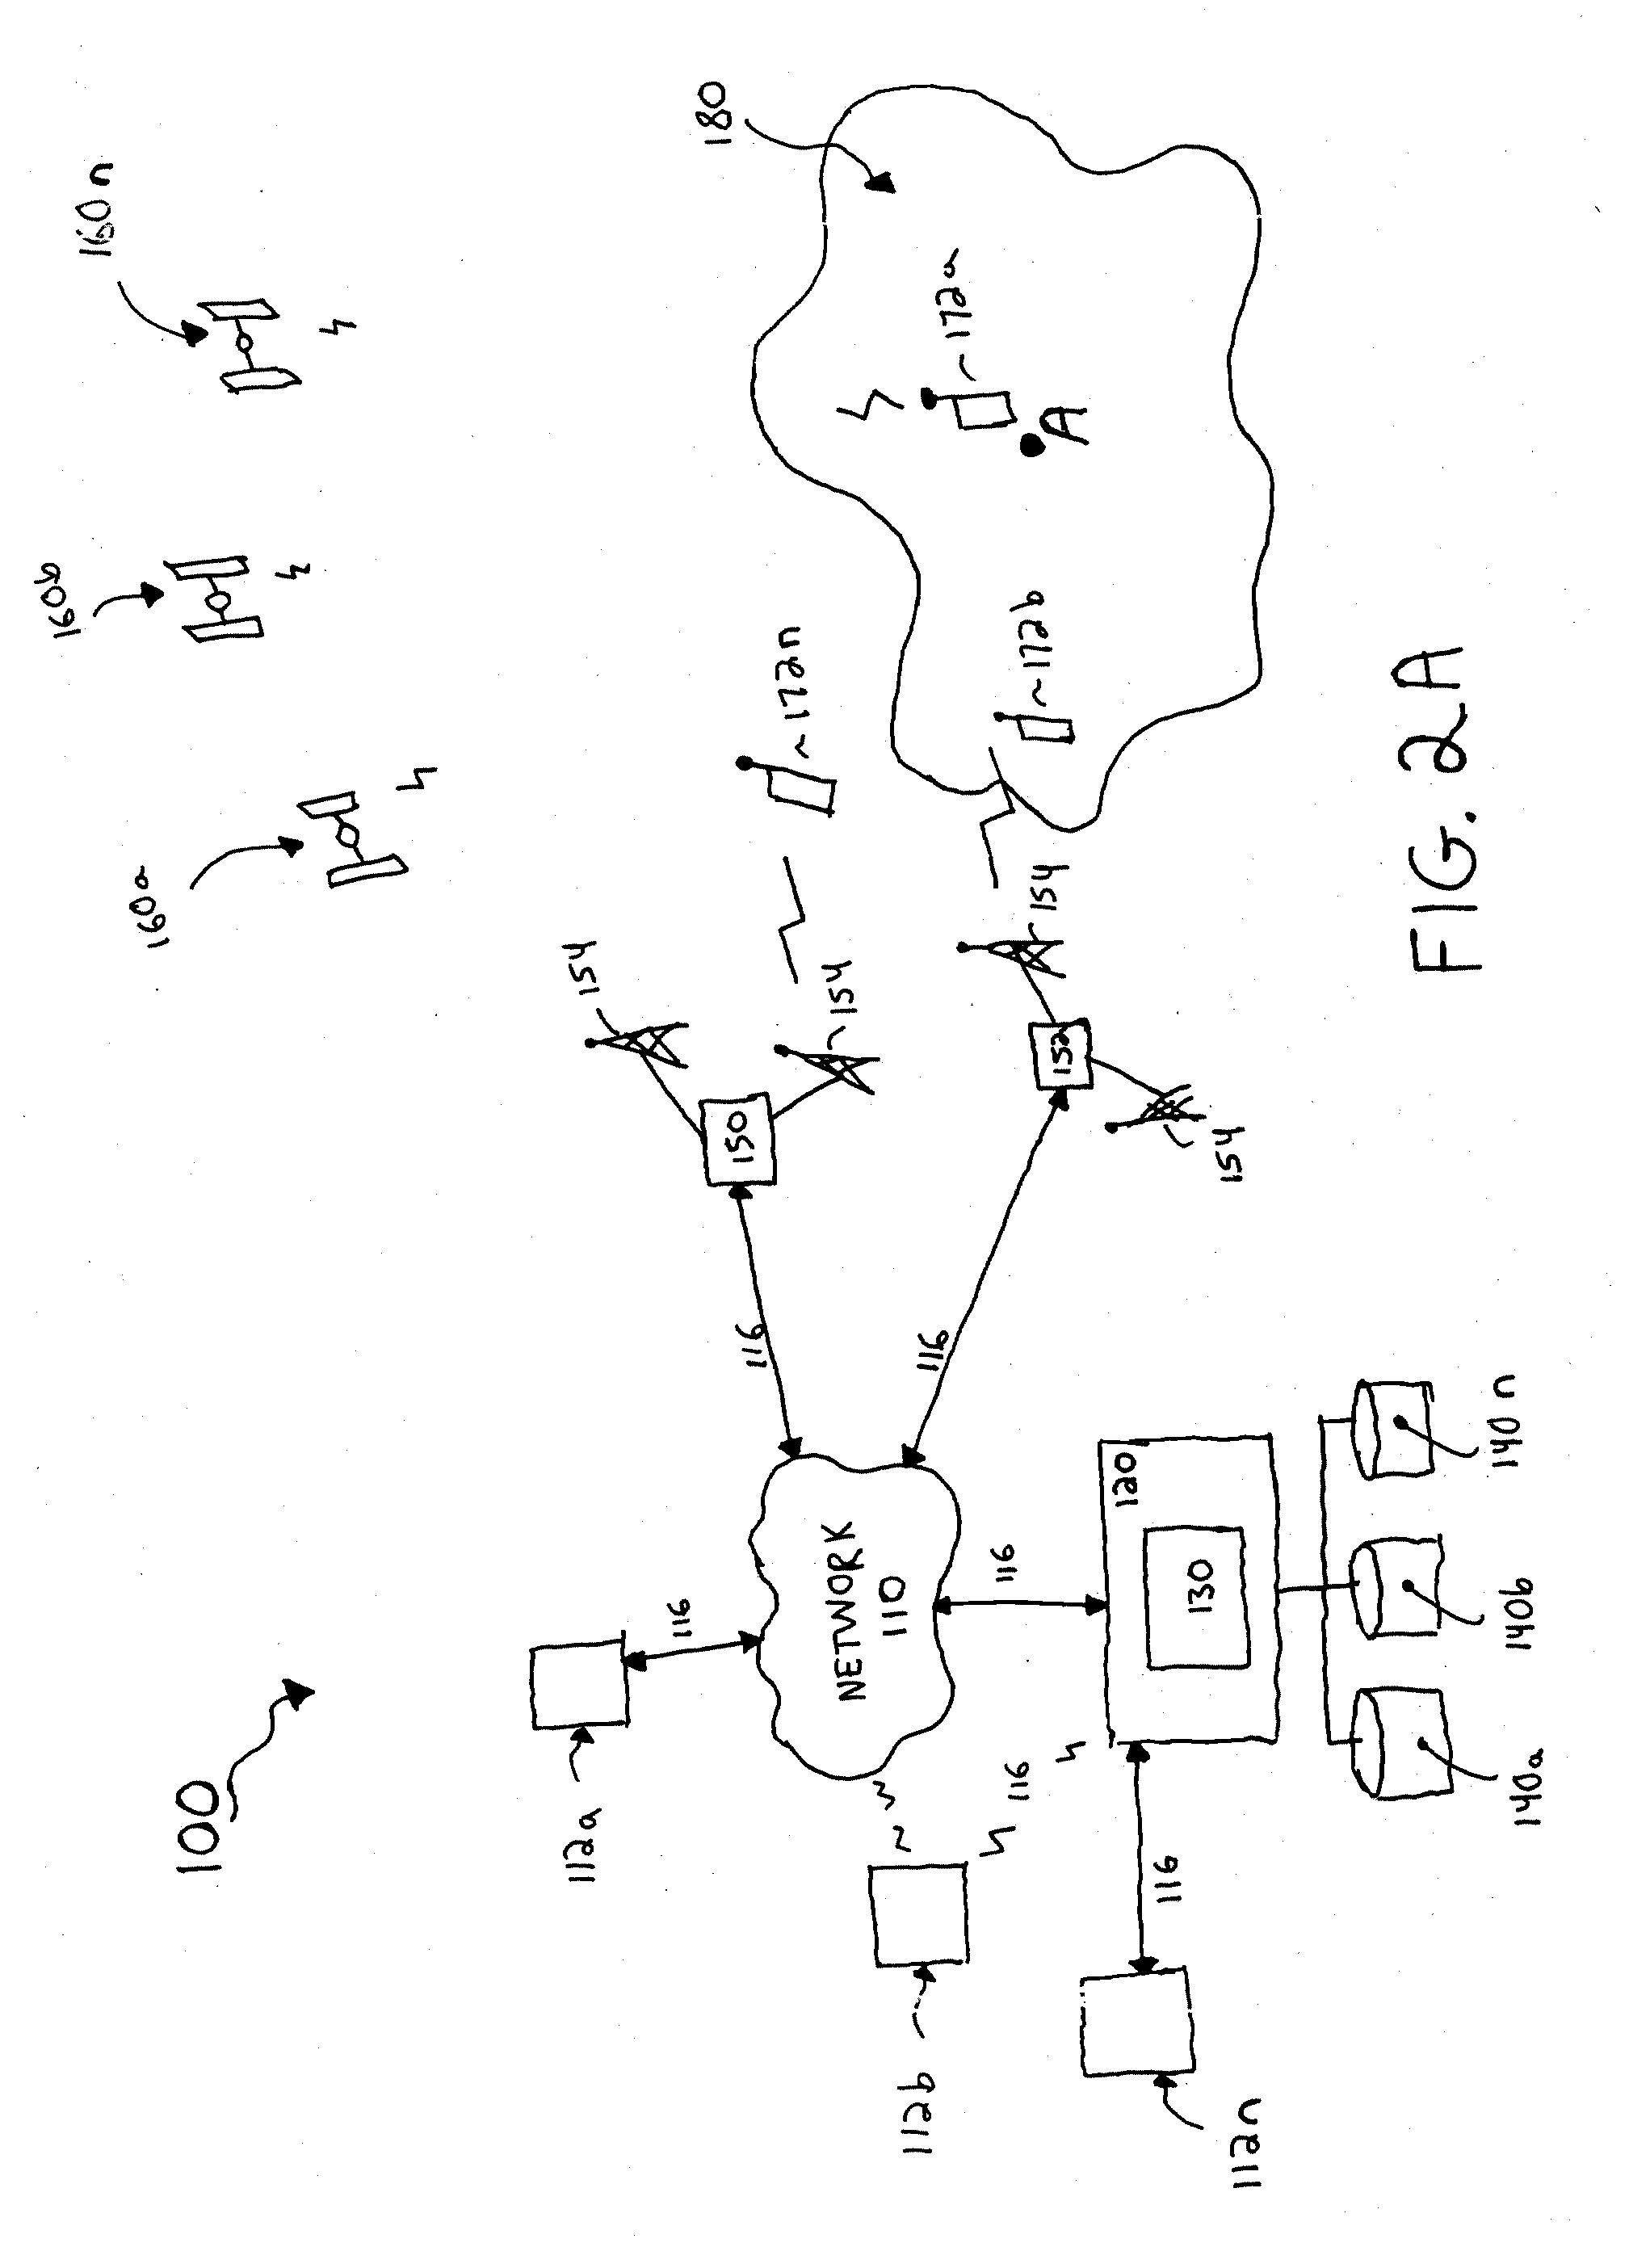 System and method including asynchronous location-based messaging